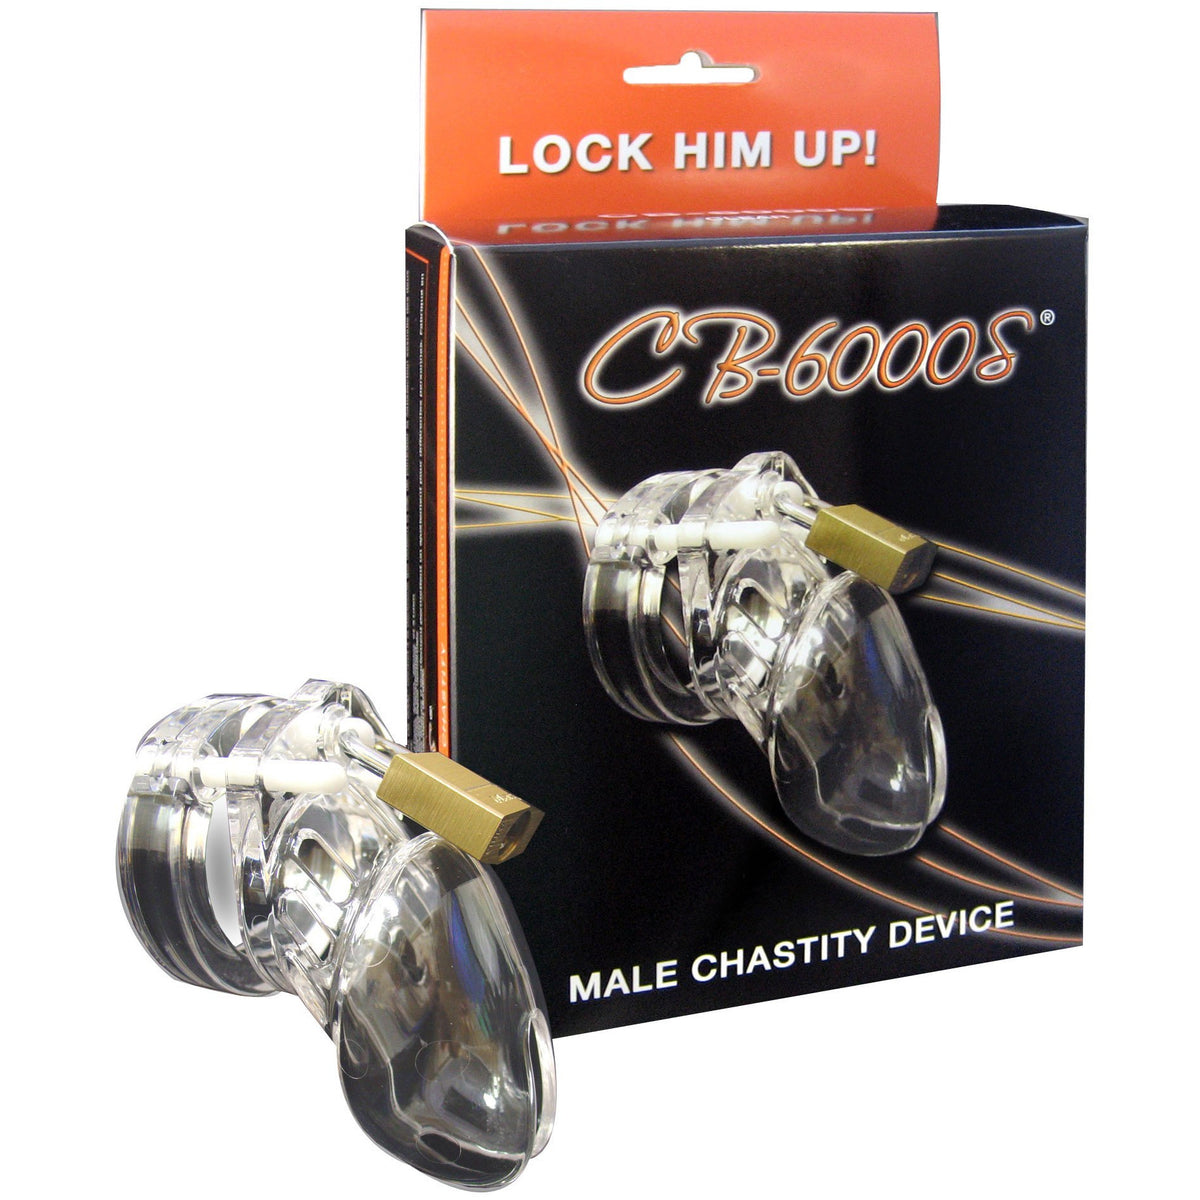 CB-6000S Clear Male Chastity Device